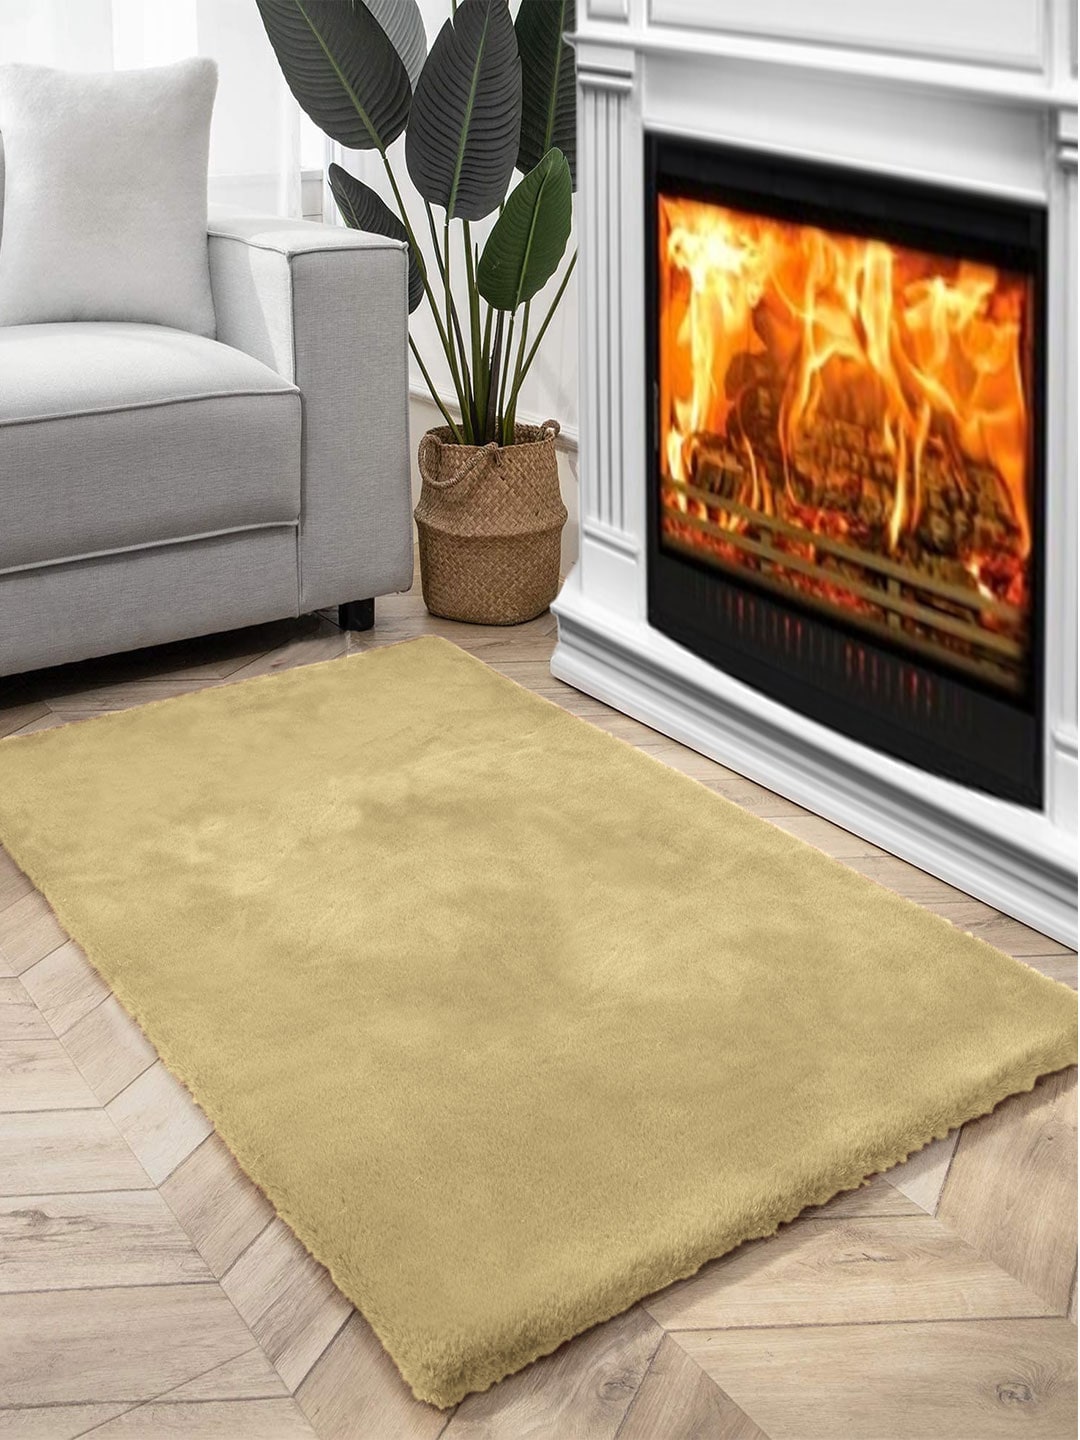 FI Gold Polycotton Solid Bath Rugs Price in India